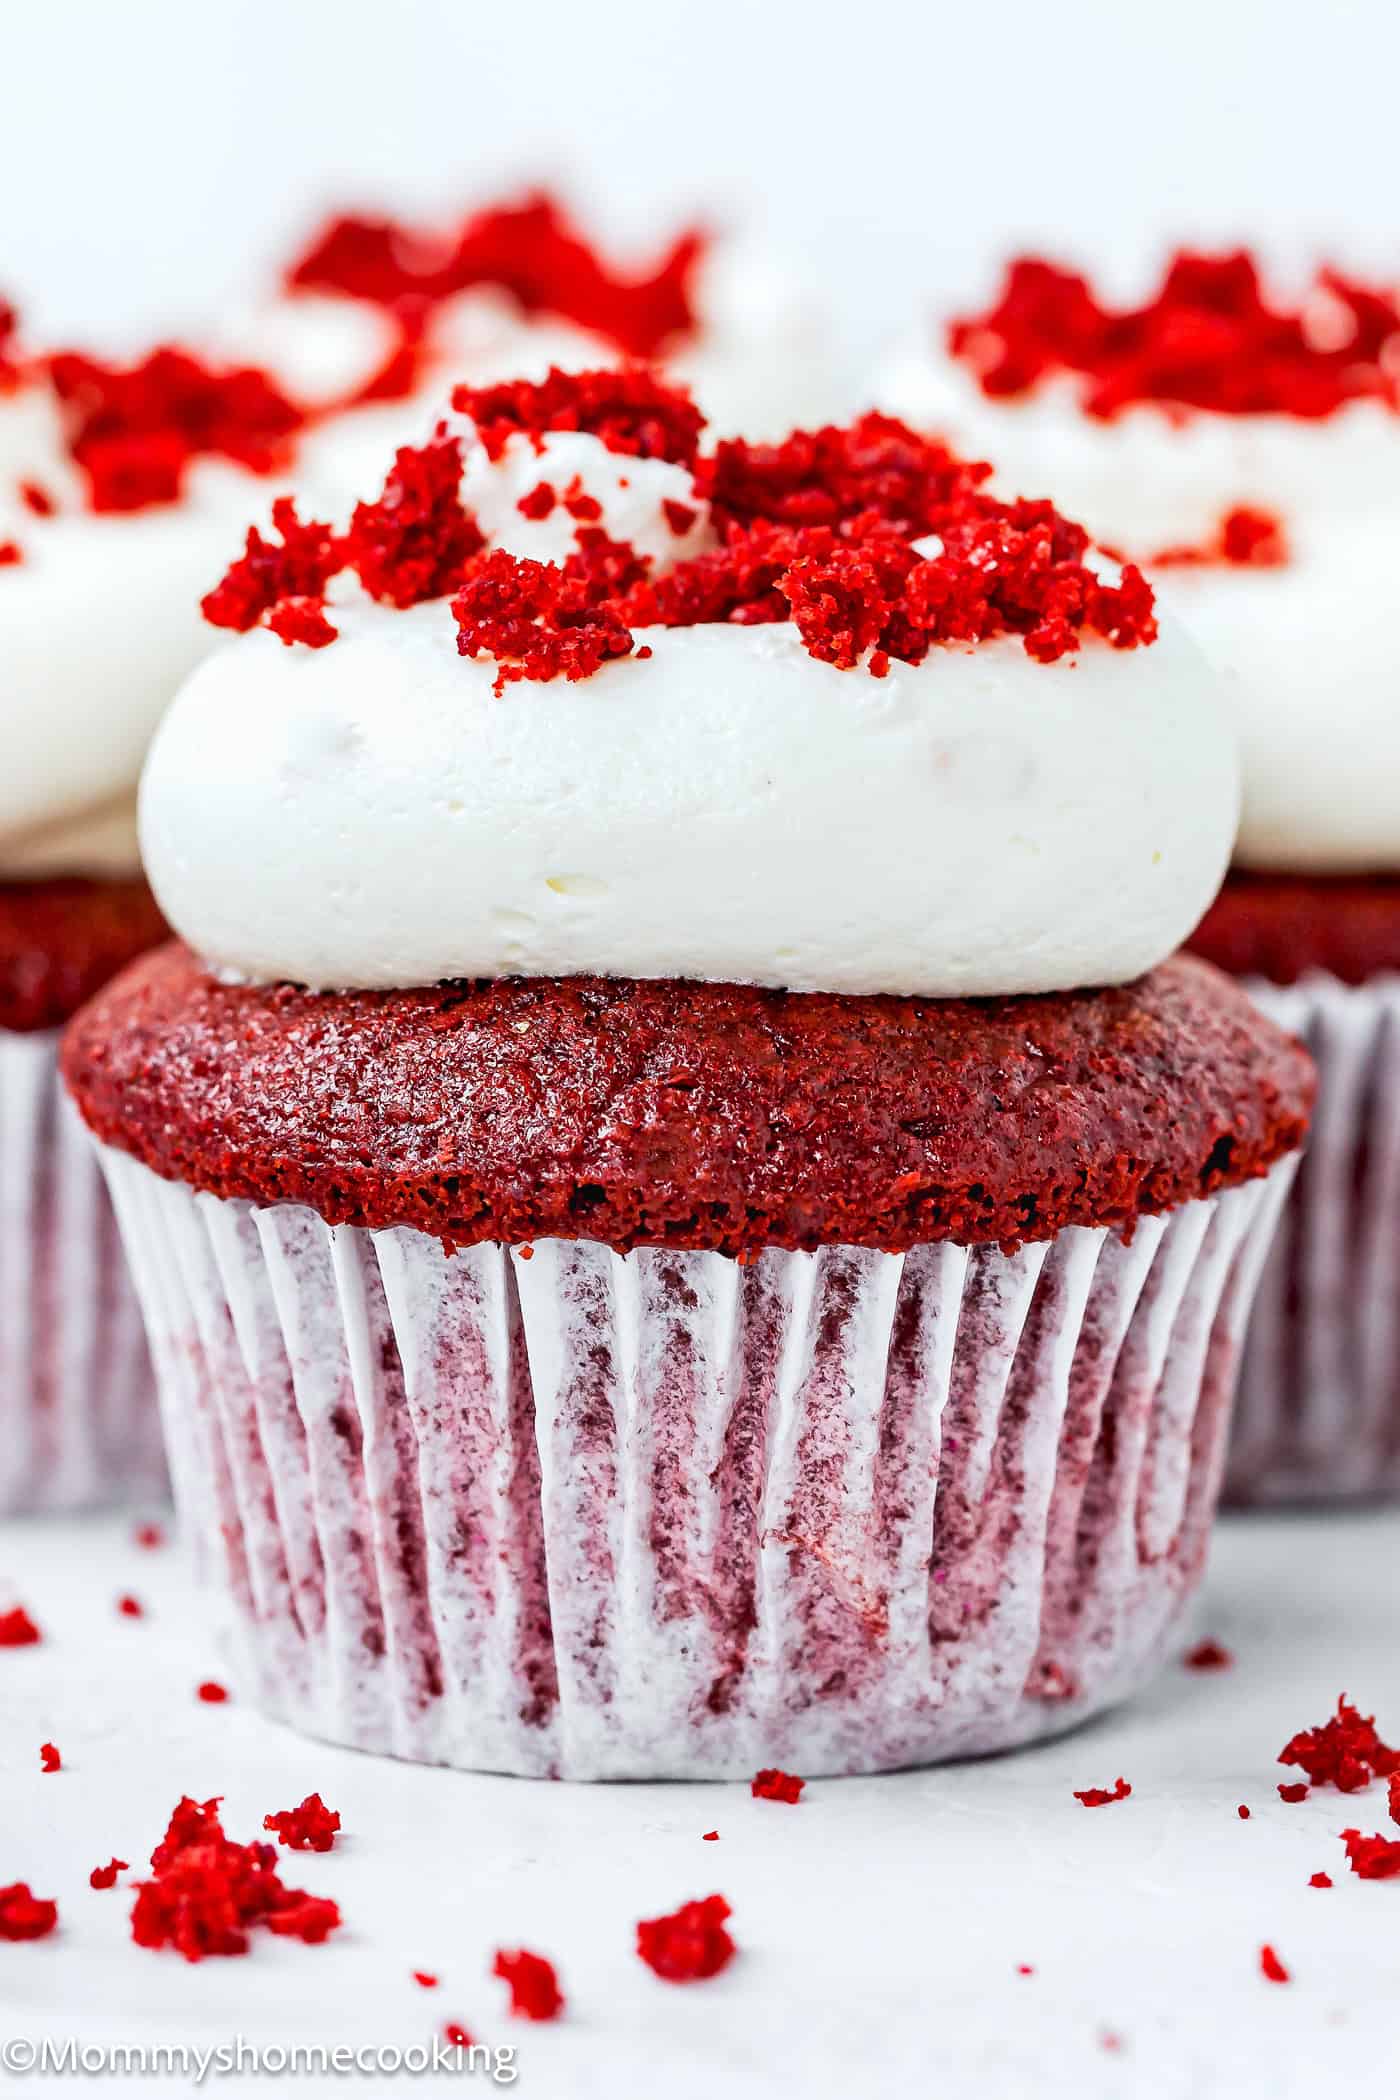 Vegan Red Velvet Cupcake with frosting and red velvet crumbs on top.